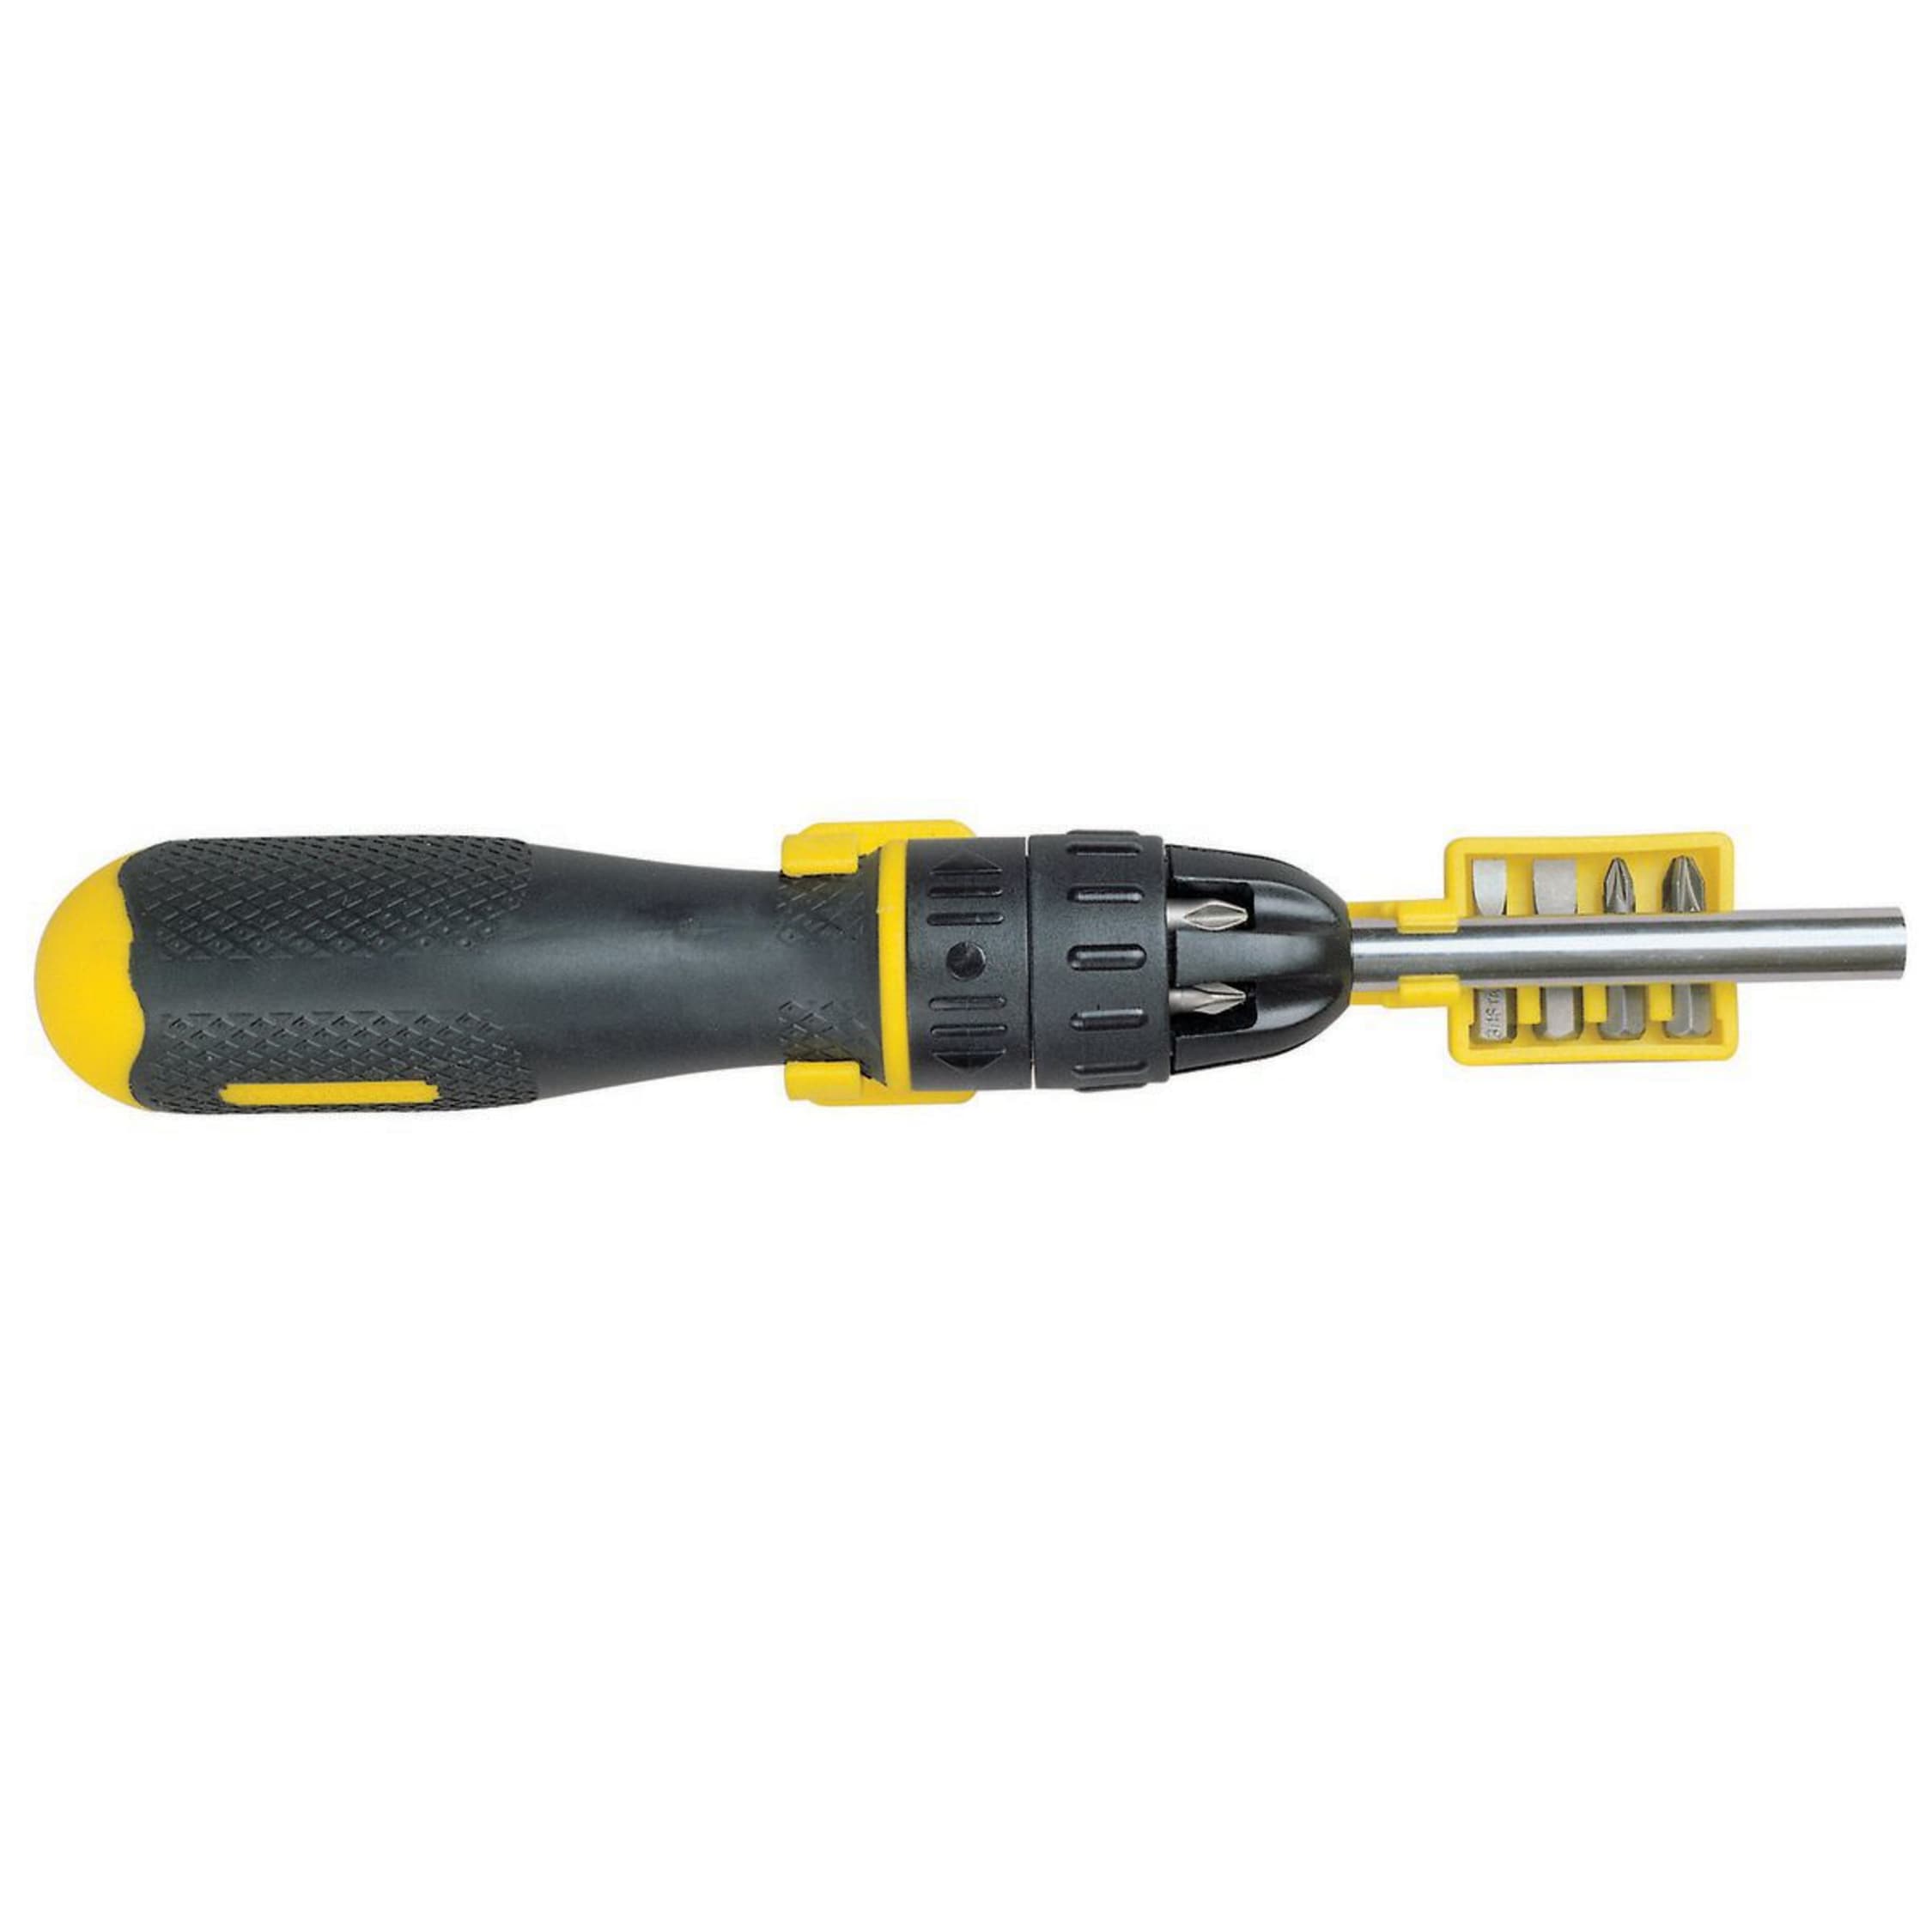 Stanley 68-010 Multibit Ratcheting Screwdriver with 10 Assorted Bits